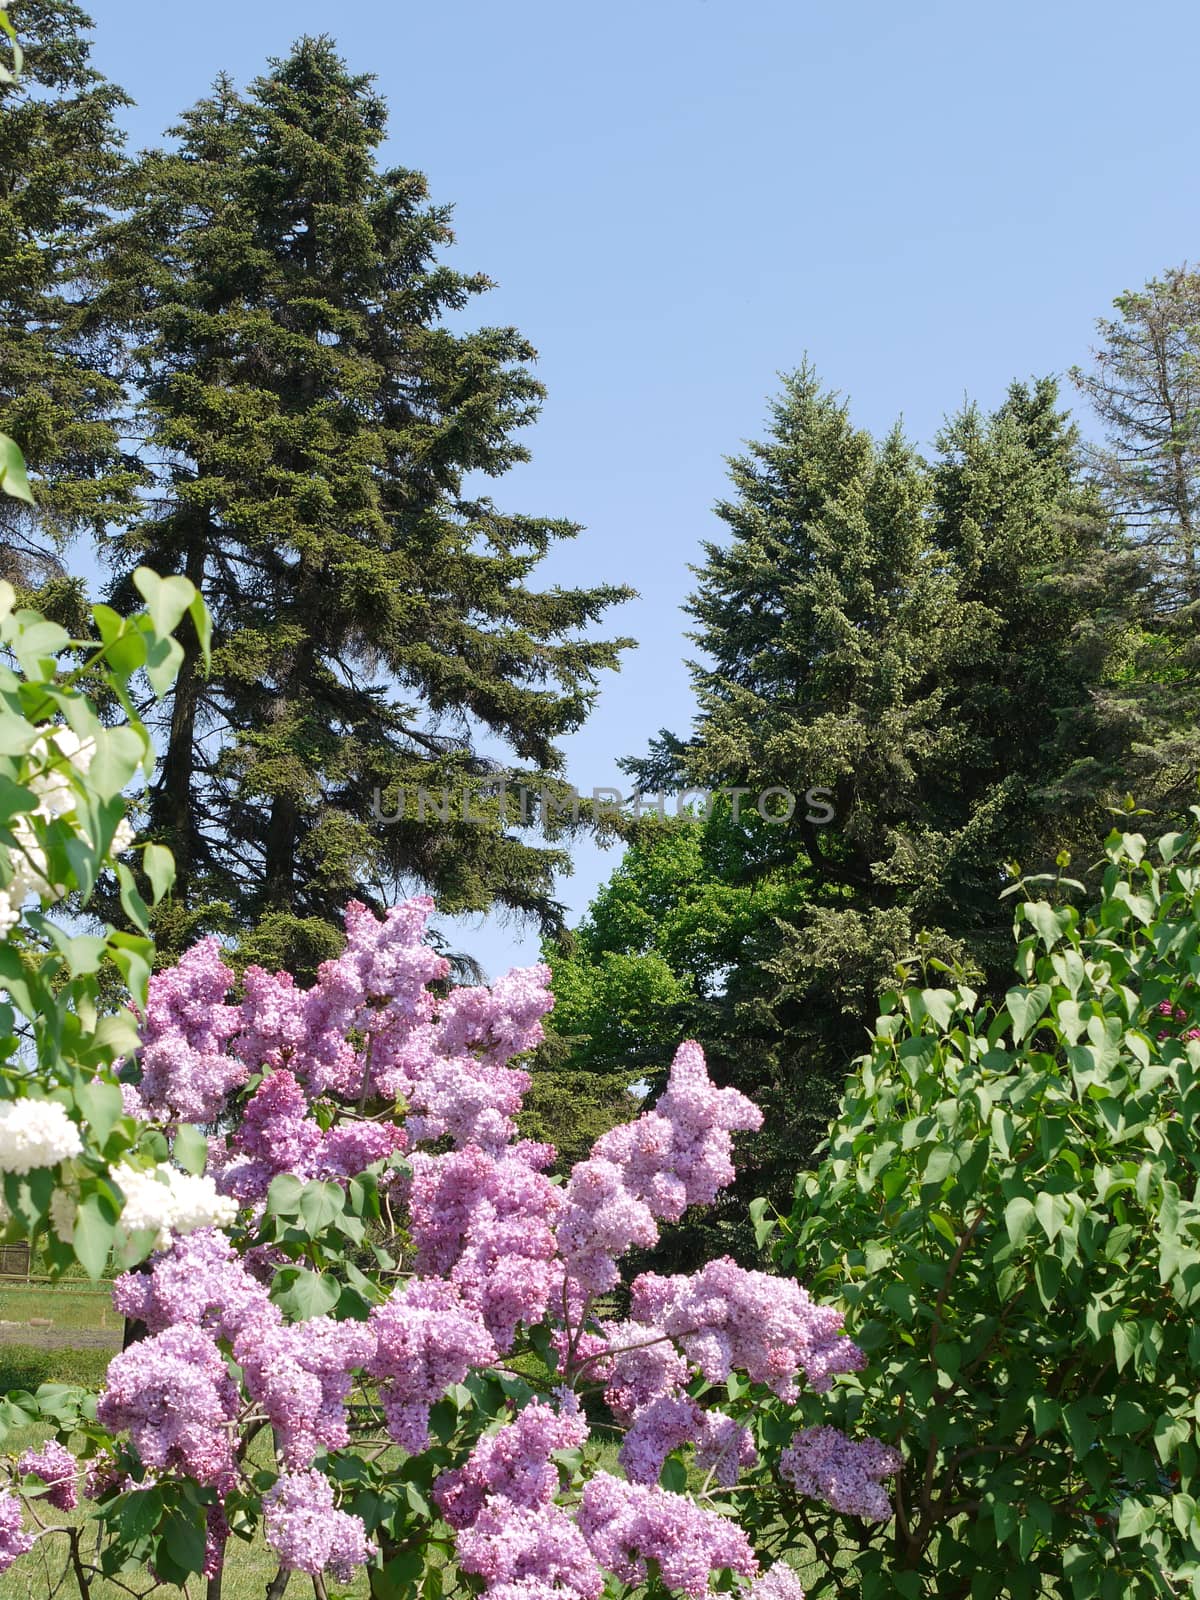 The tops of different trees and bushes against the blue sky, the contrast which creates a blossoming lilac